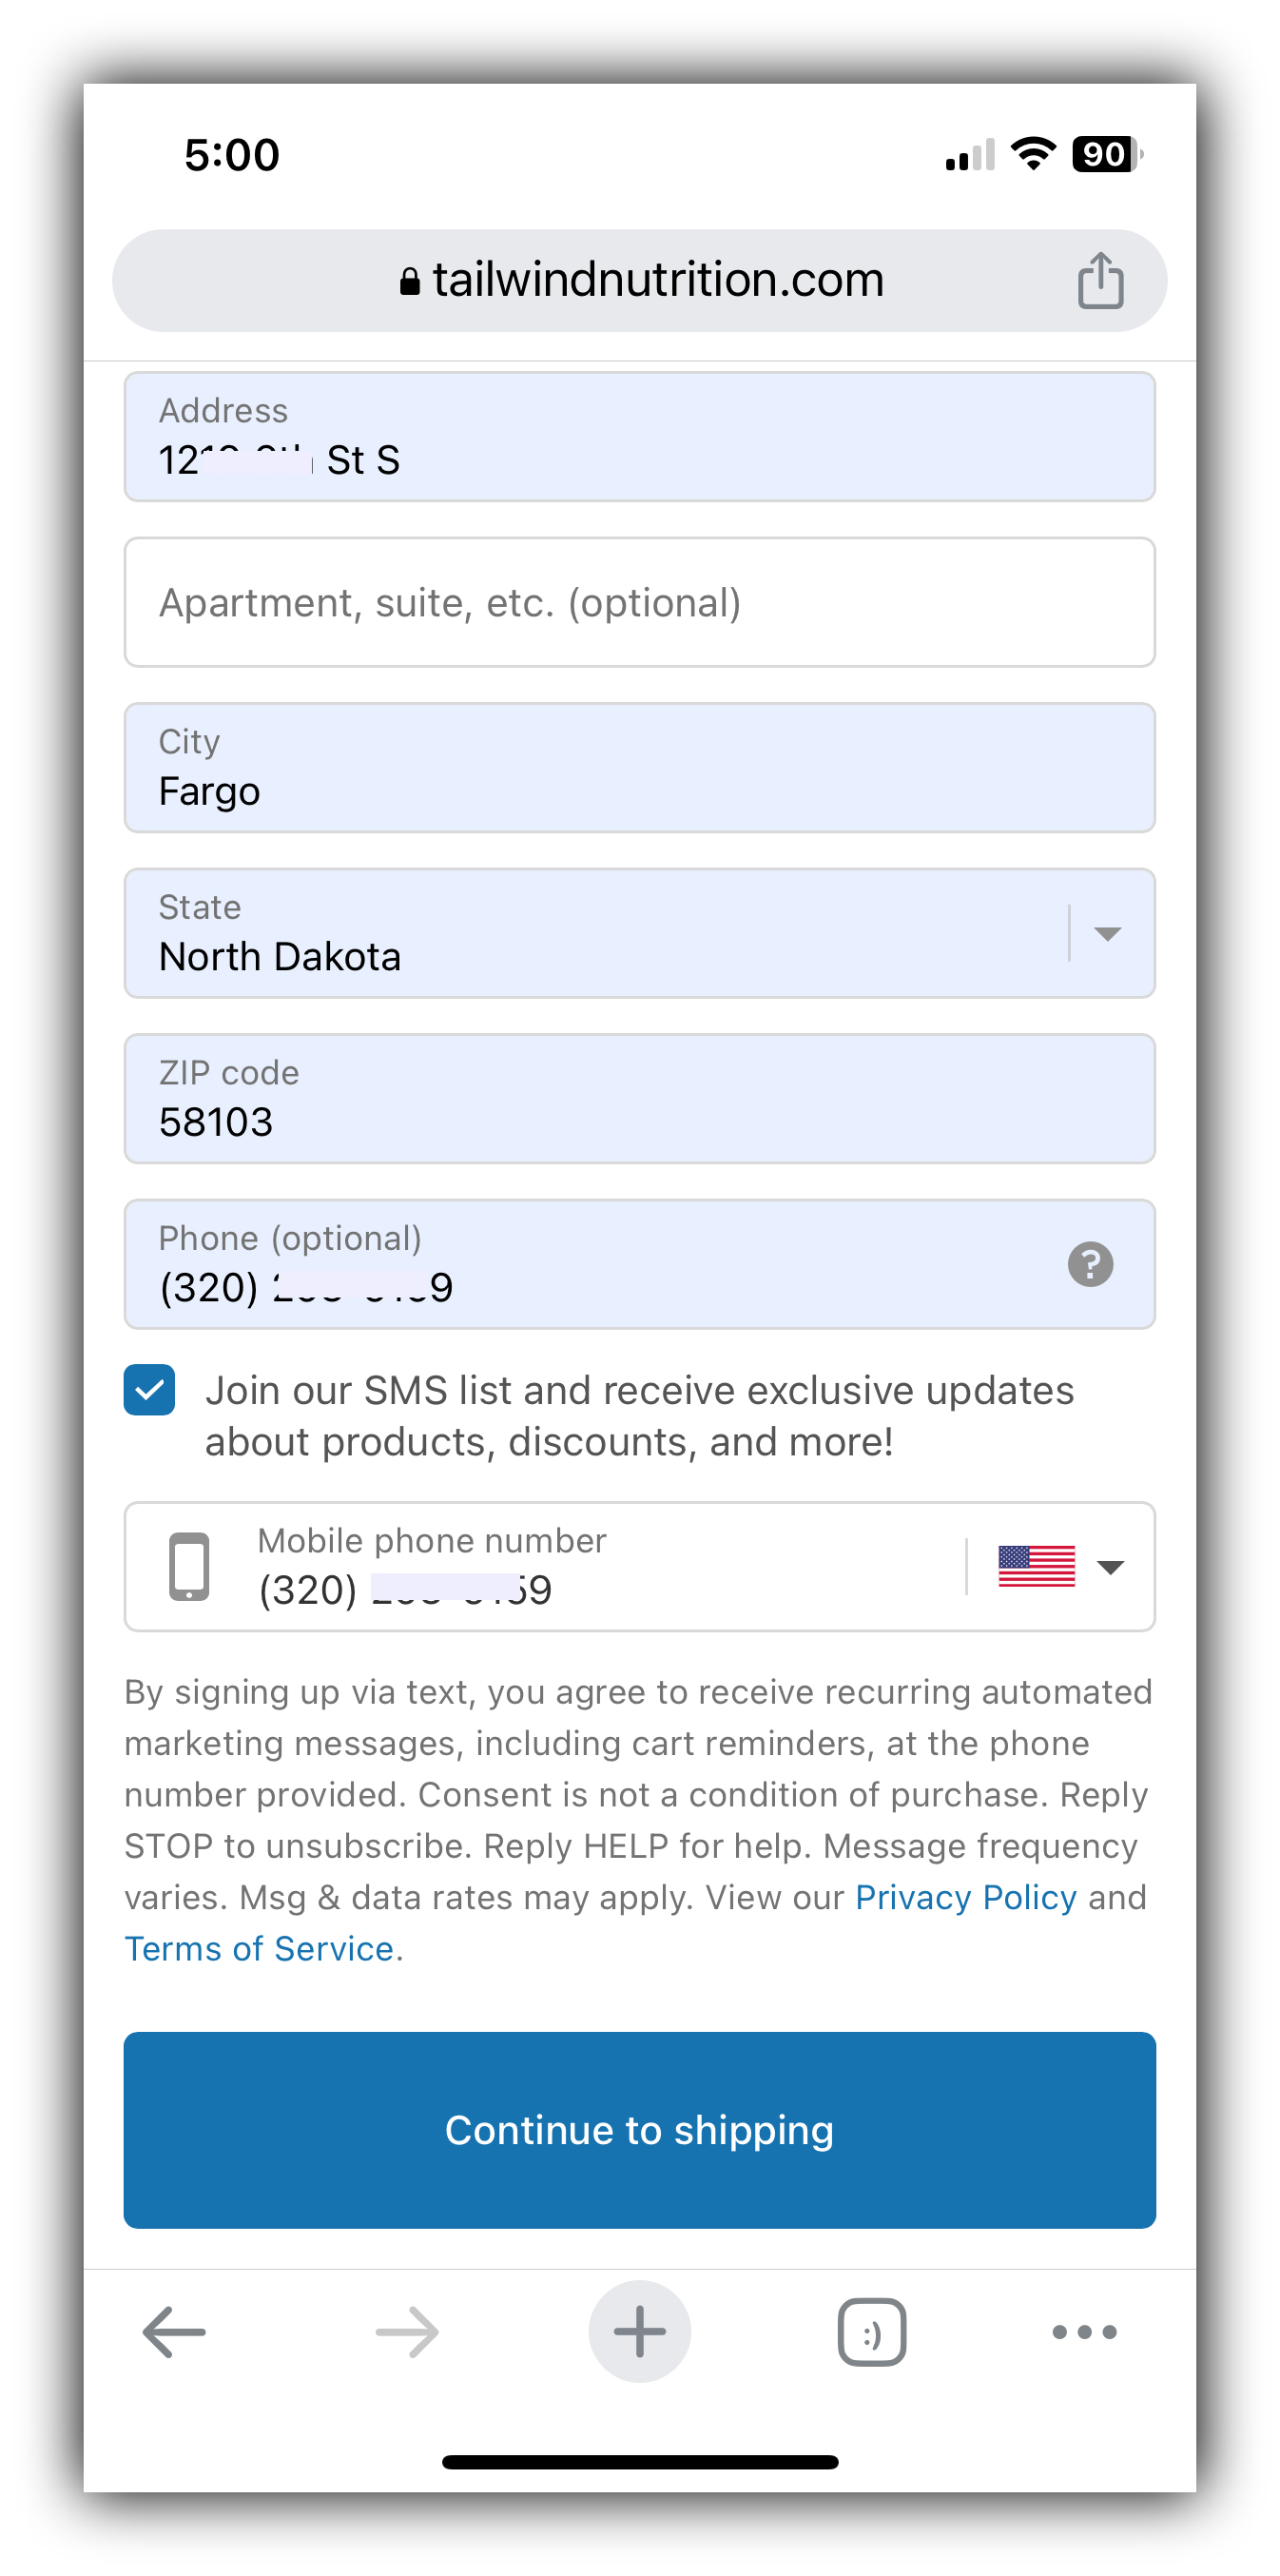 Tailwind Nutritions checkout process asks for express written consent to send customers text messages